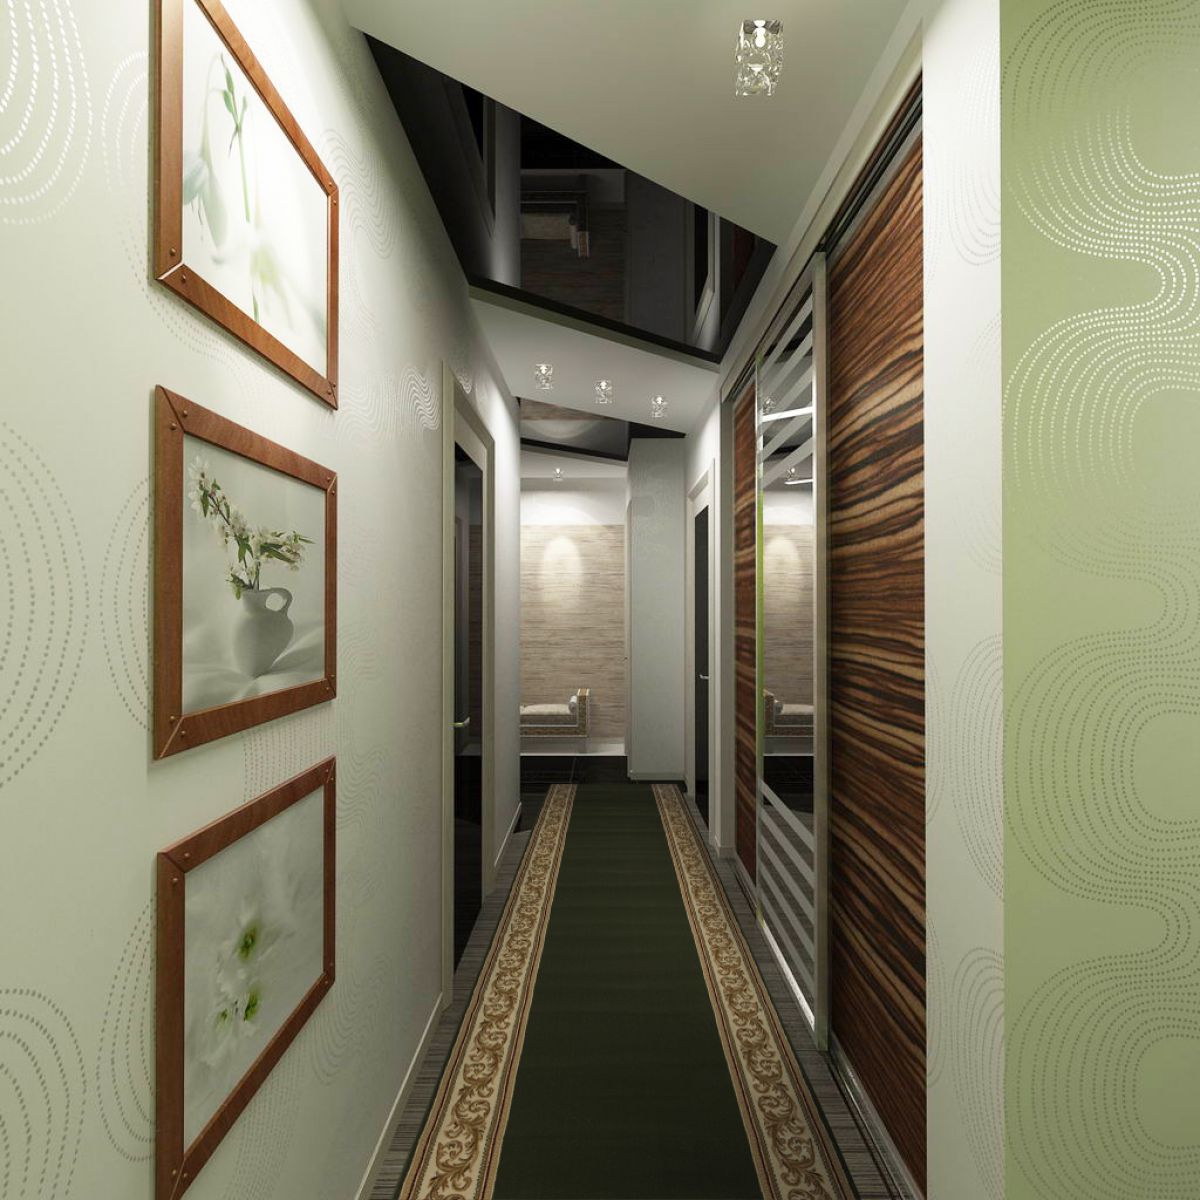 wallpaper for a small narrow hallway